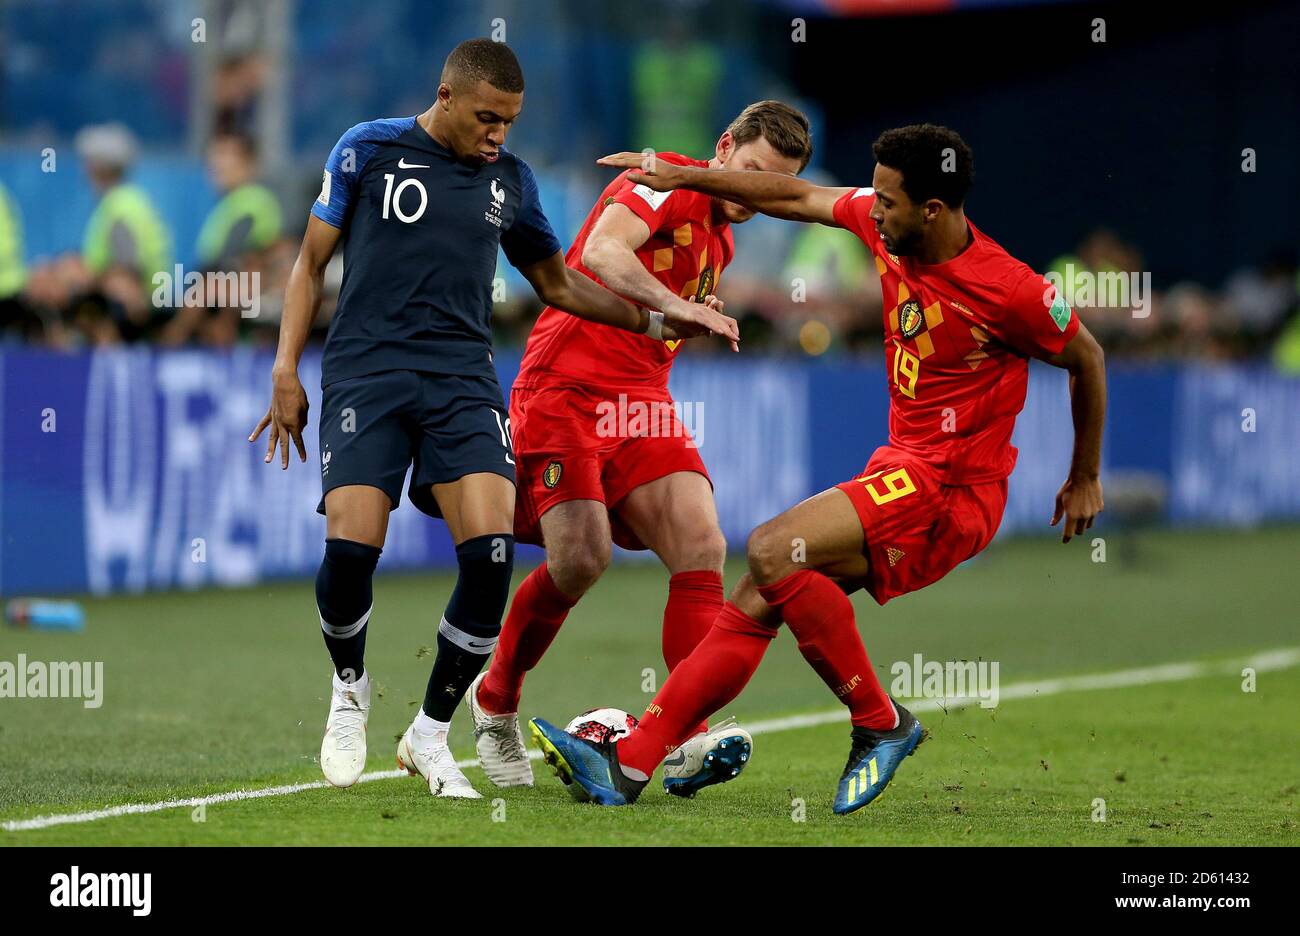 France's Kylian Mbappe (left) battles for the ball with Belgium's Jan Vertonghen (centre) and Belgium's Mousa Dembele (right) Stock Photo